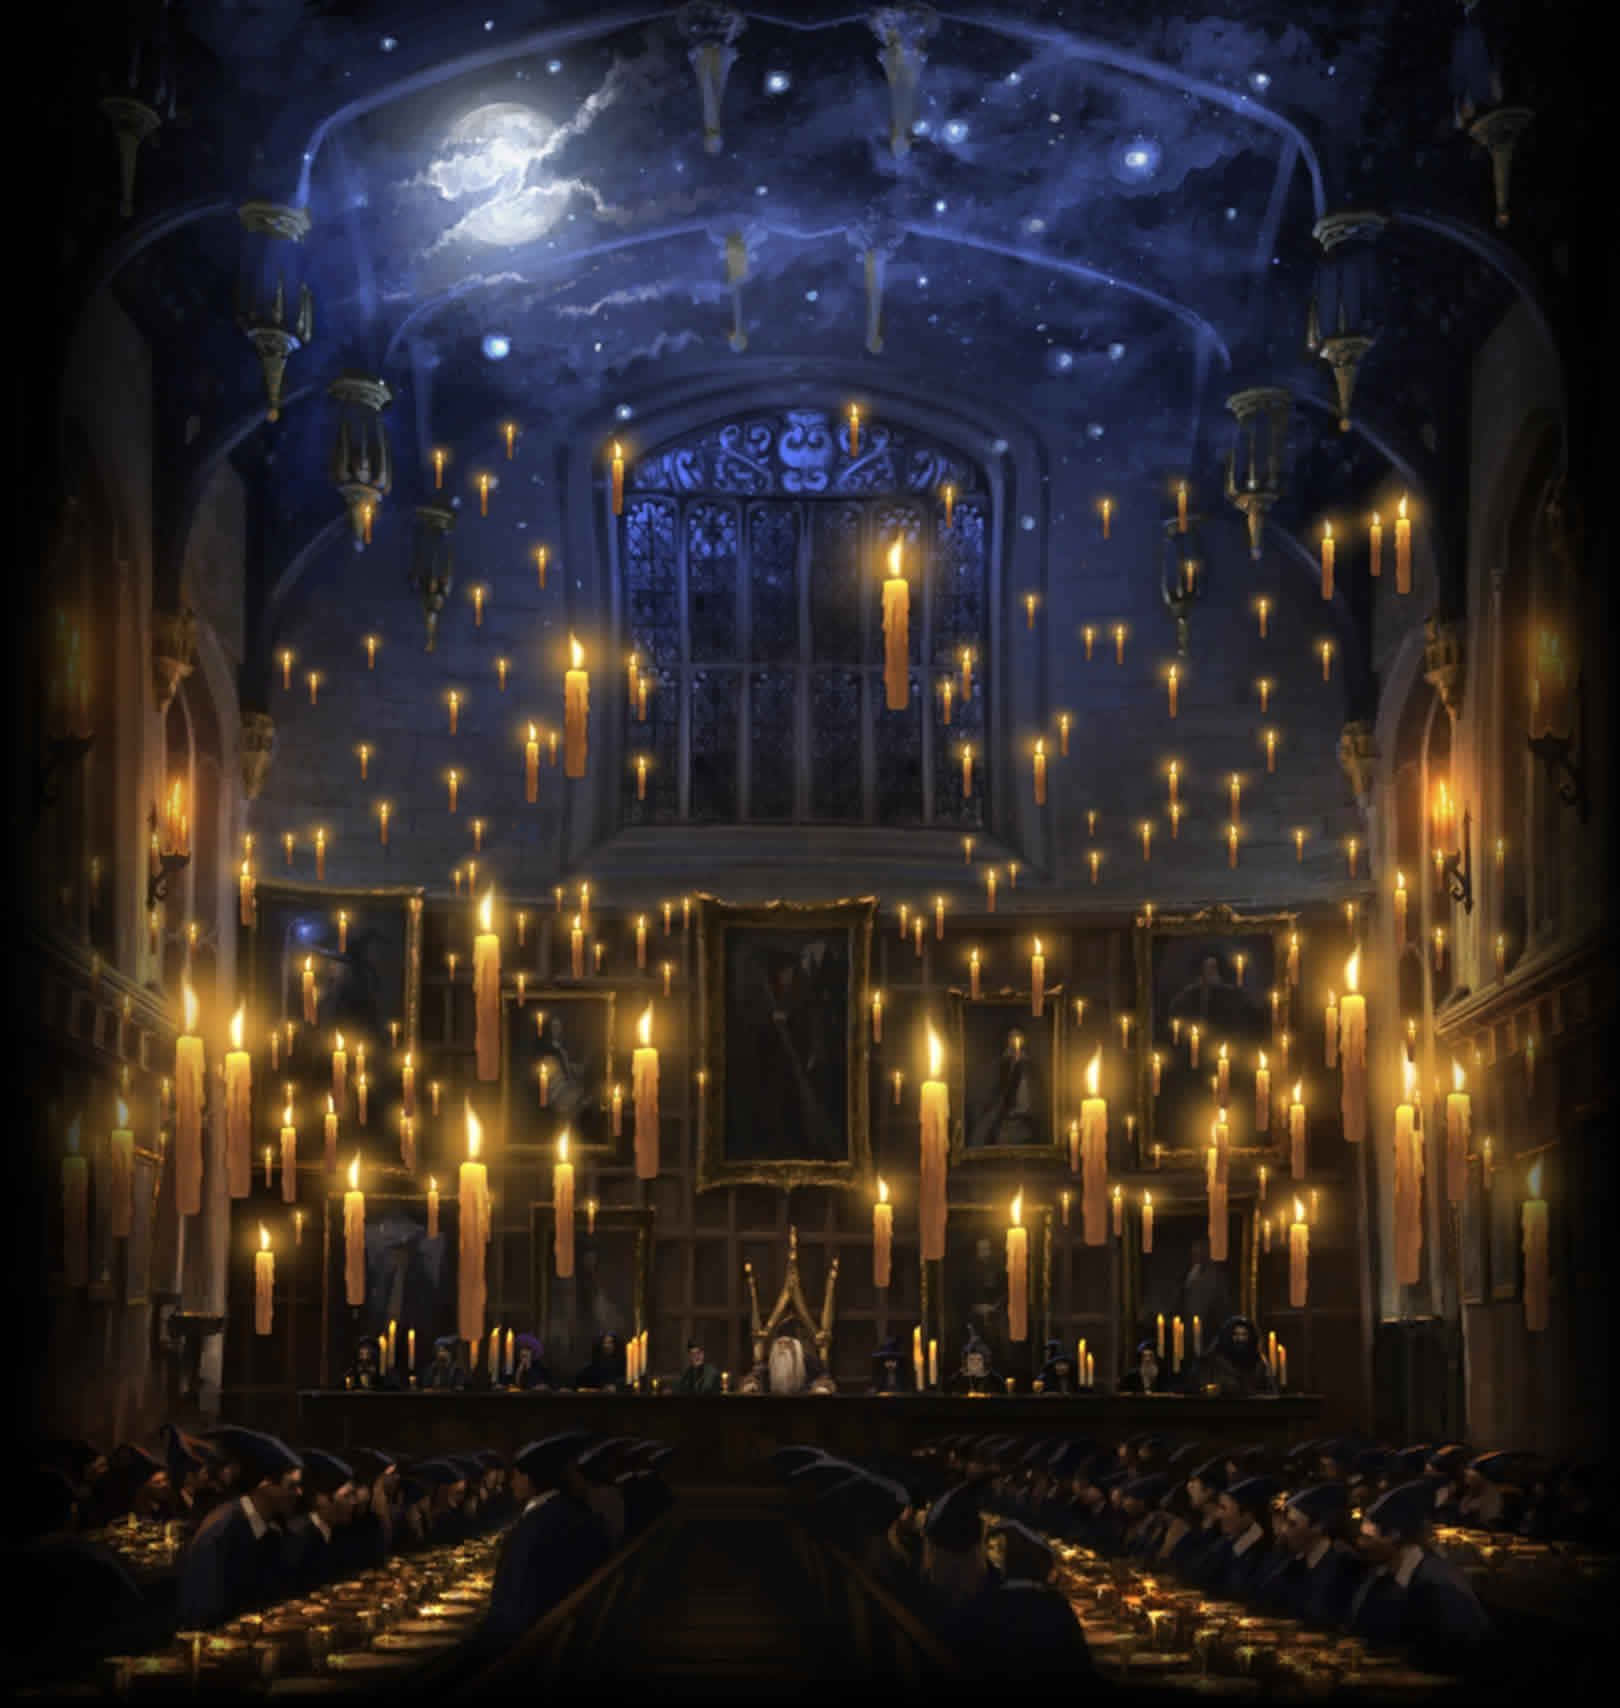 "The Yule Ball is on - Come Join the Festivities at Hogwarts this Christmas!" Wallpaper